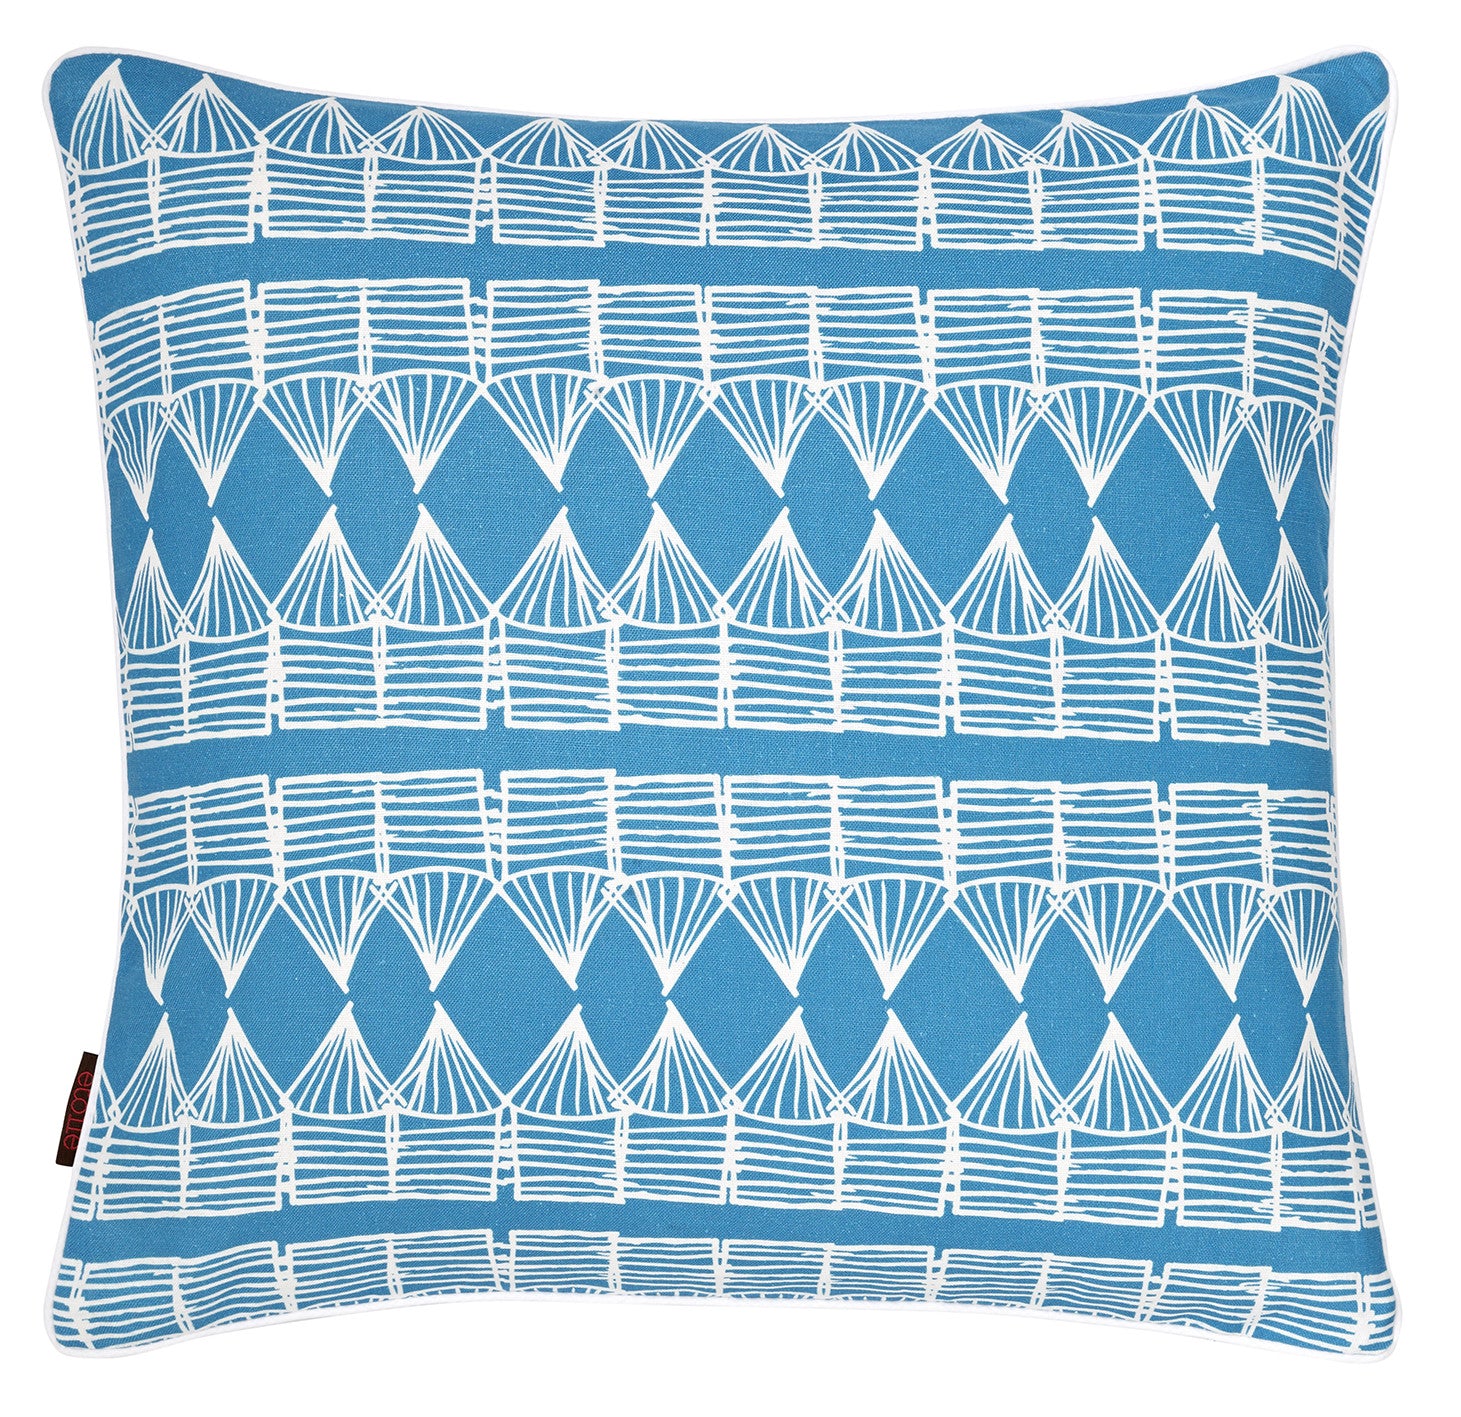 Tiki Huts Pattern Linen Throw Pillow Cushion in Bright Turquoise Blue 45x45cm 18x18" ships from Canada worldwide including the USA